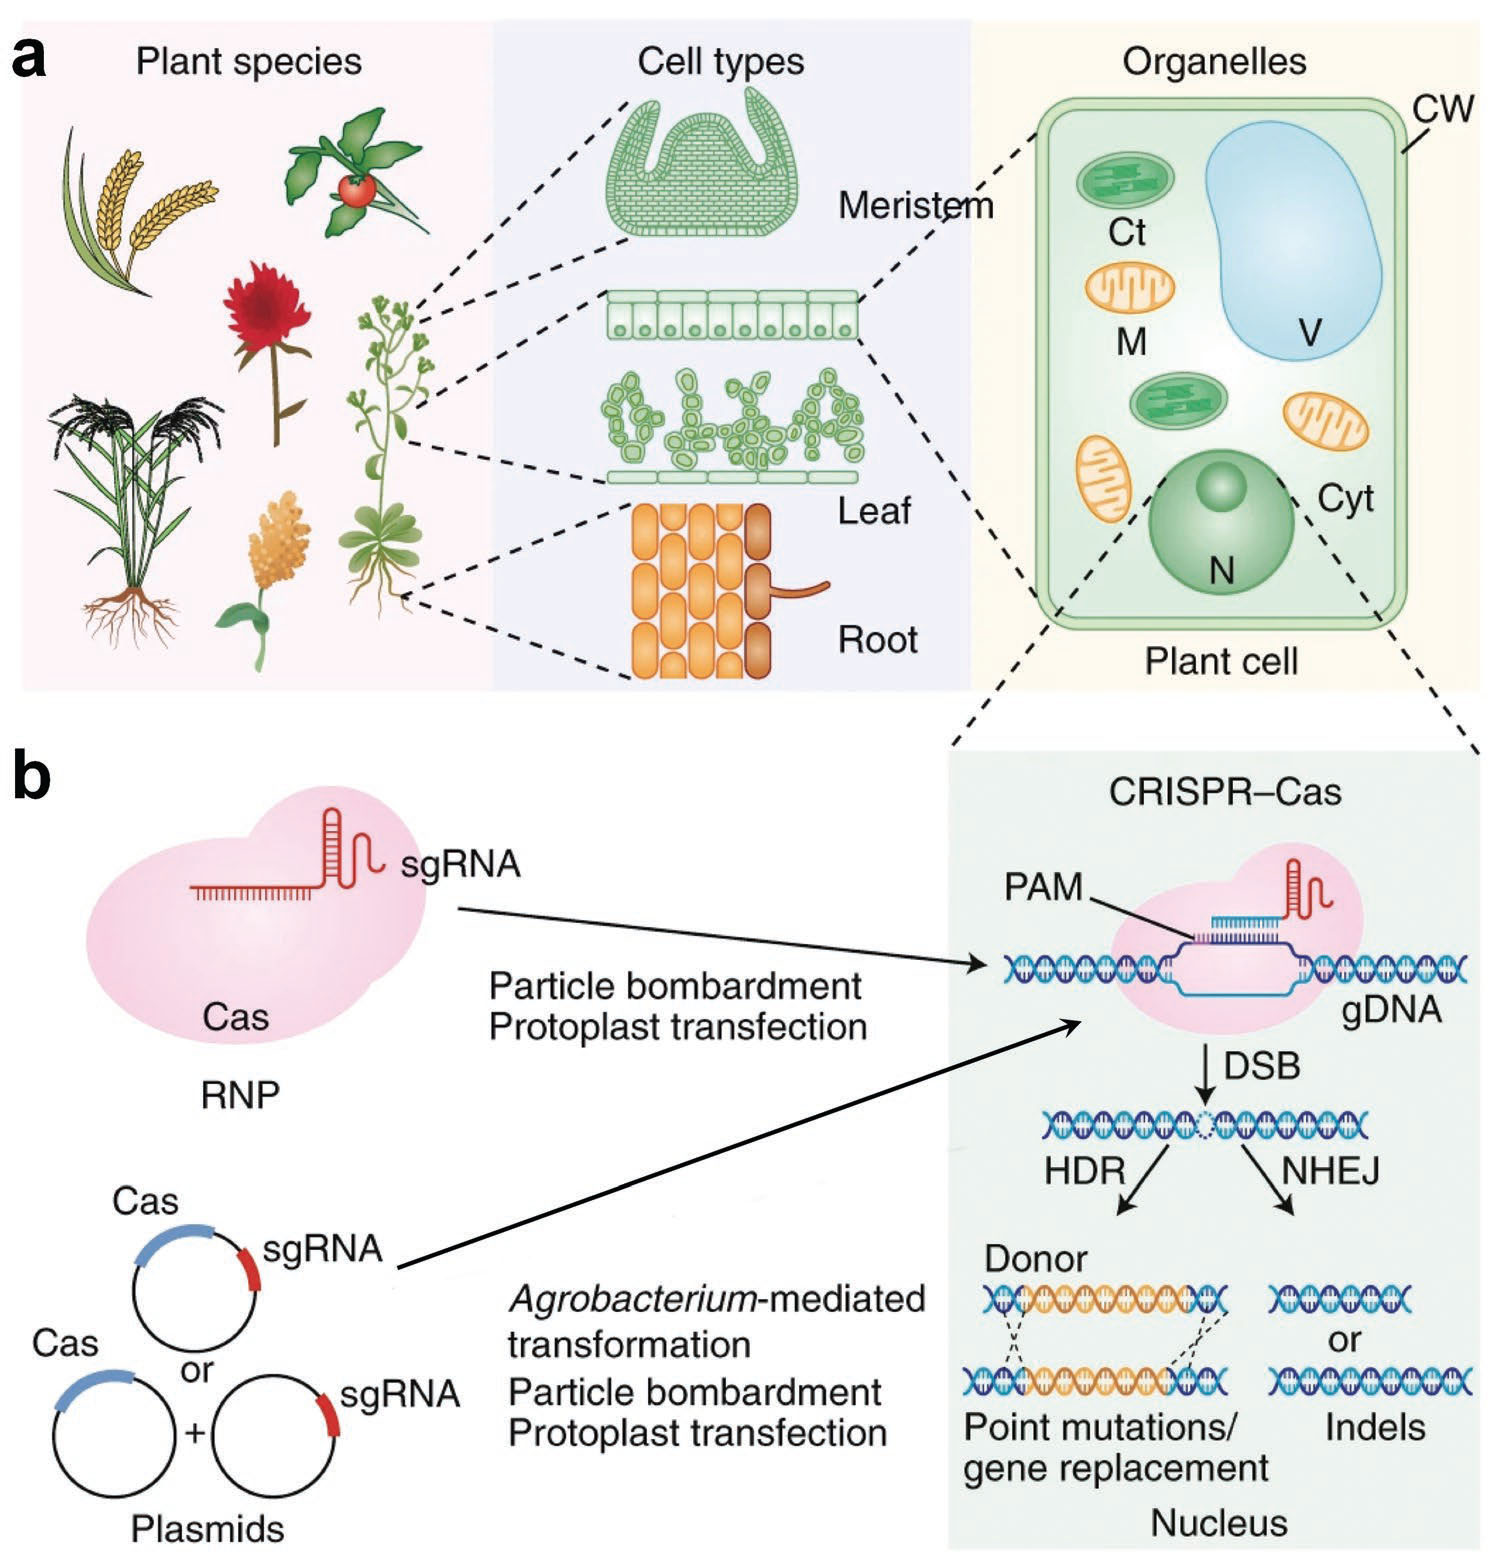 Delivery of CRISPR-Cas reagent to diverse plant species, cells, and organelles